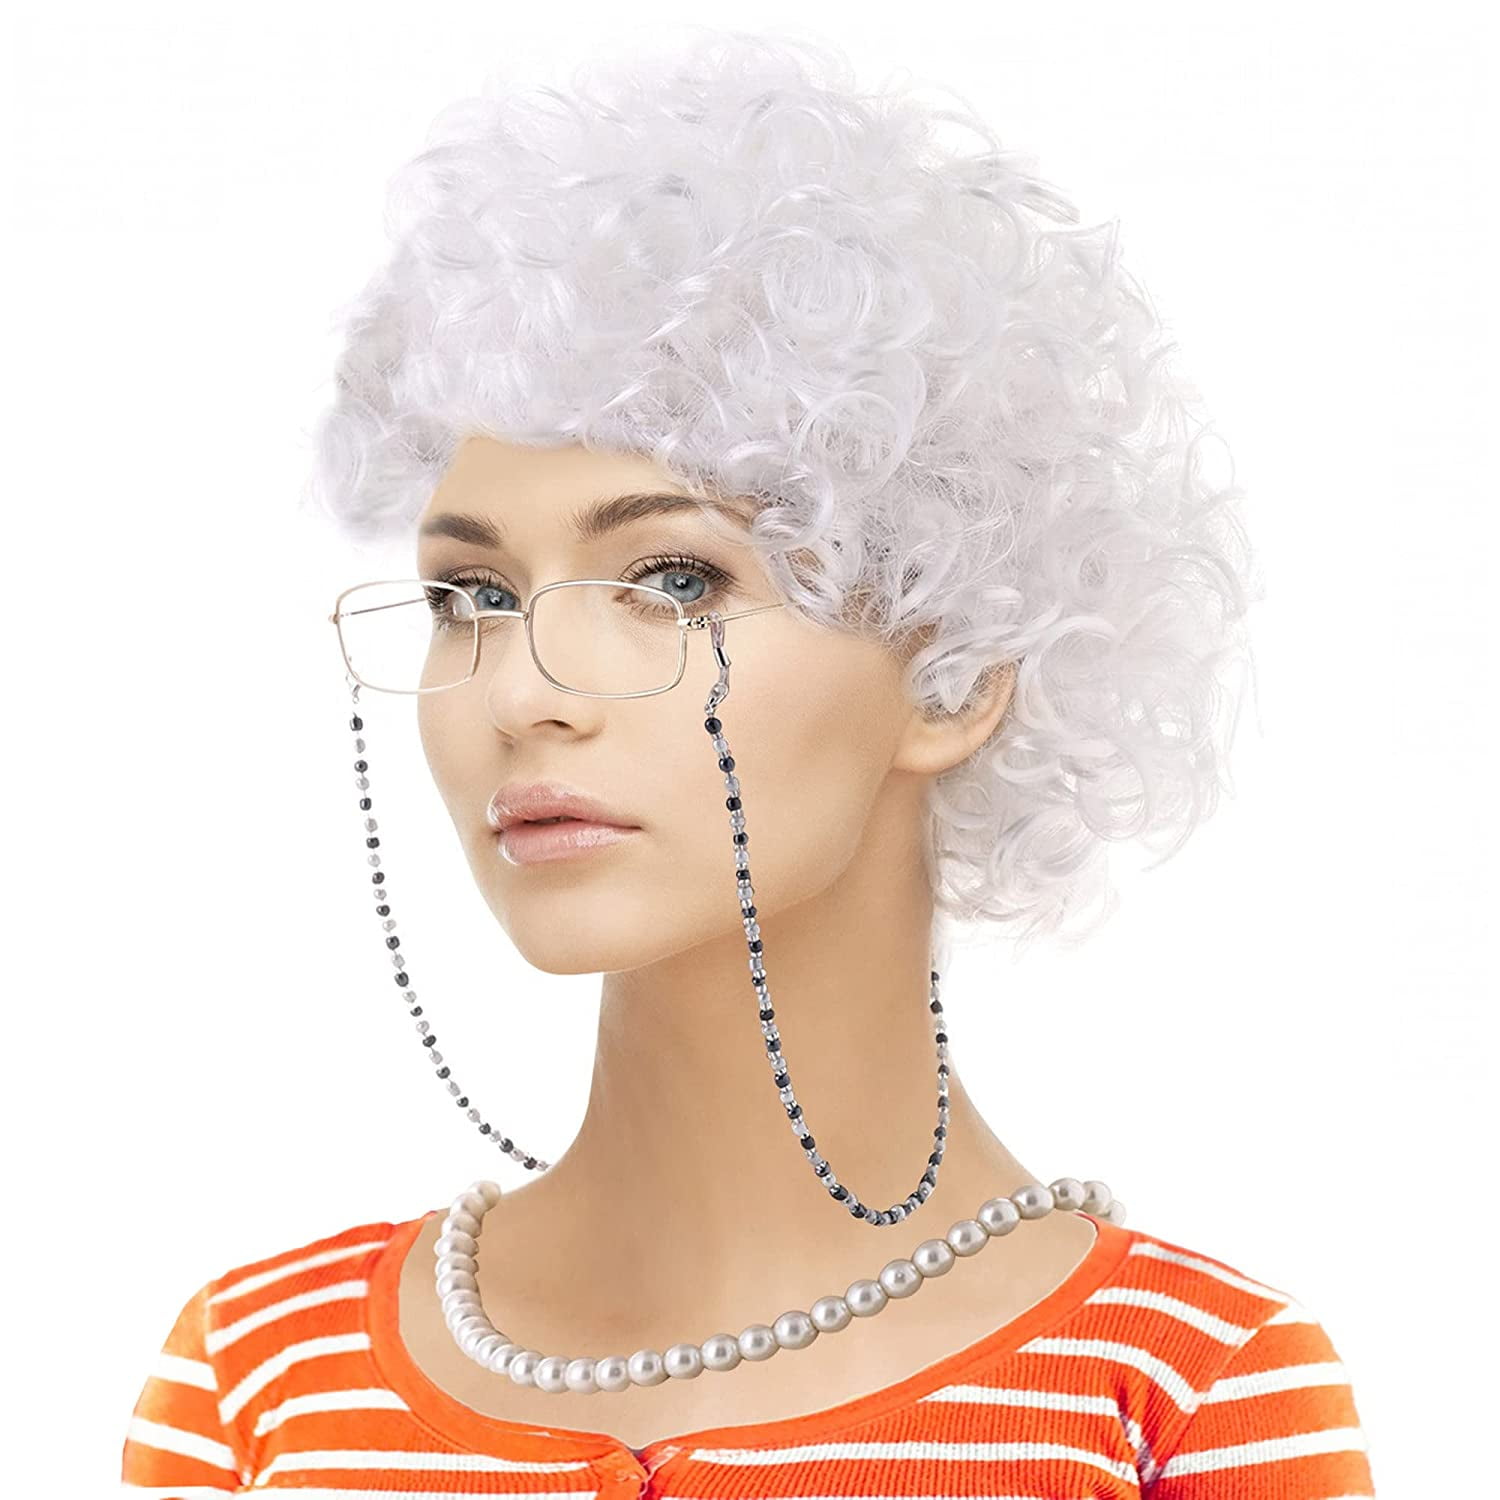 HSMQHJWE Middle Part Wigs for Women Old Lady Wig Granny Wig Old Lady for  Women Grandma Wig Cap Glasses Chain Pearl Necklace Earring Bracelet(7  Pieces) Straight Wigs for Women Black 